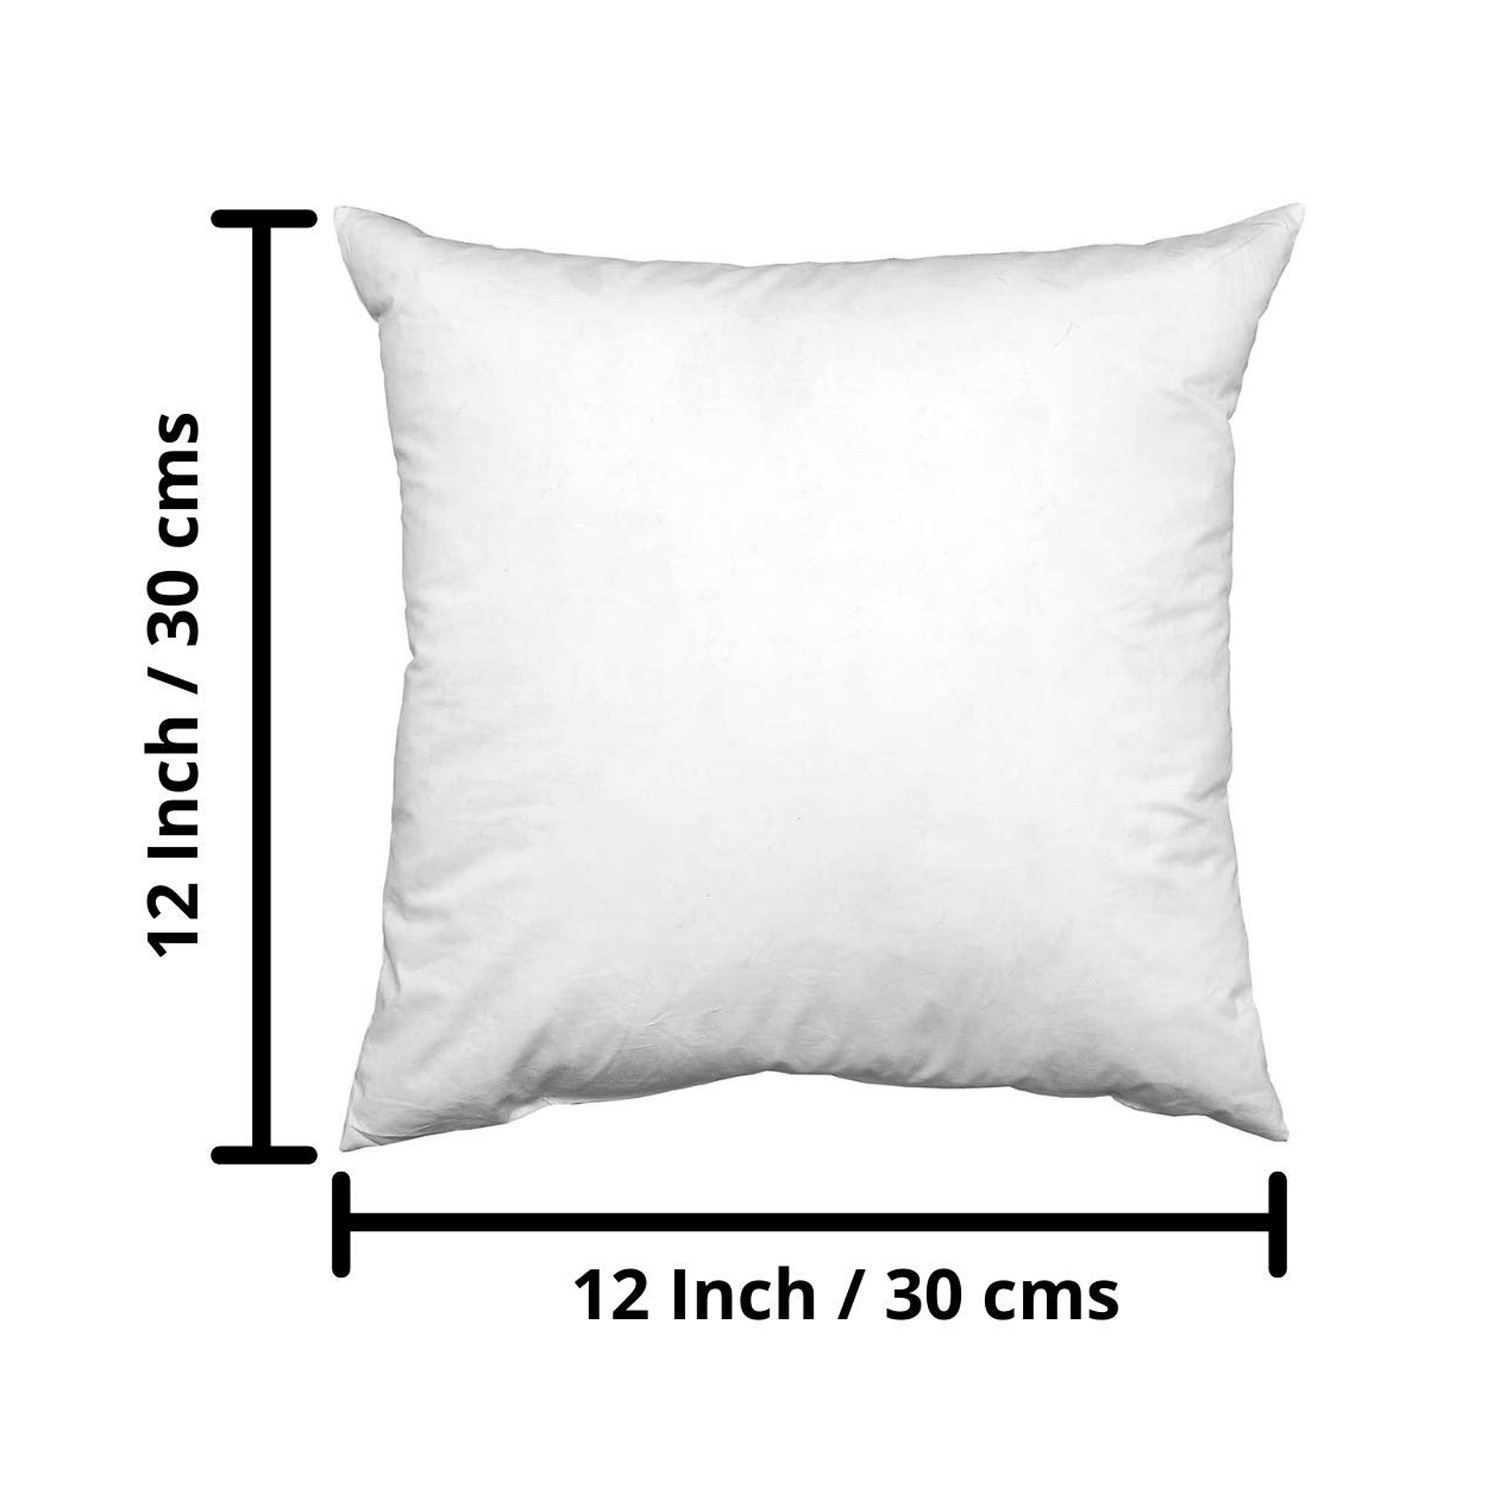 Kuber Industries Microfiber Square Throw Cushion Filler Bed and Couch Cushion Indoor Decorative Cushion, 12